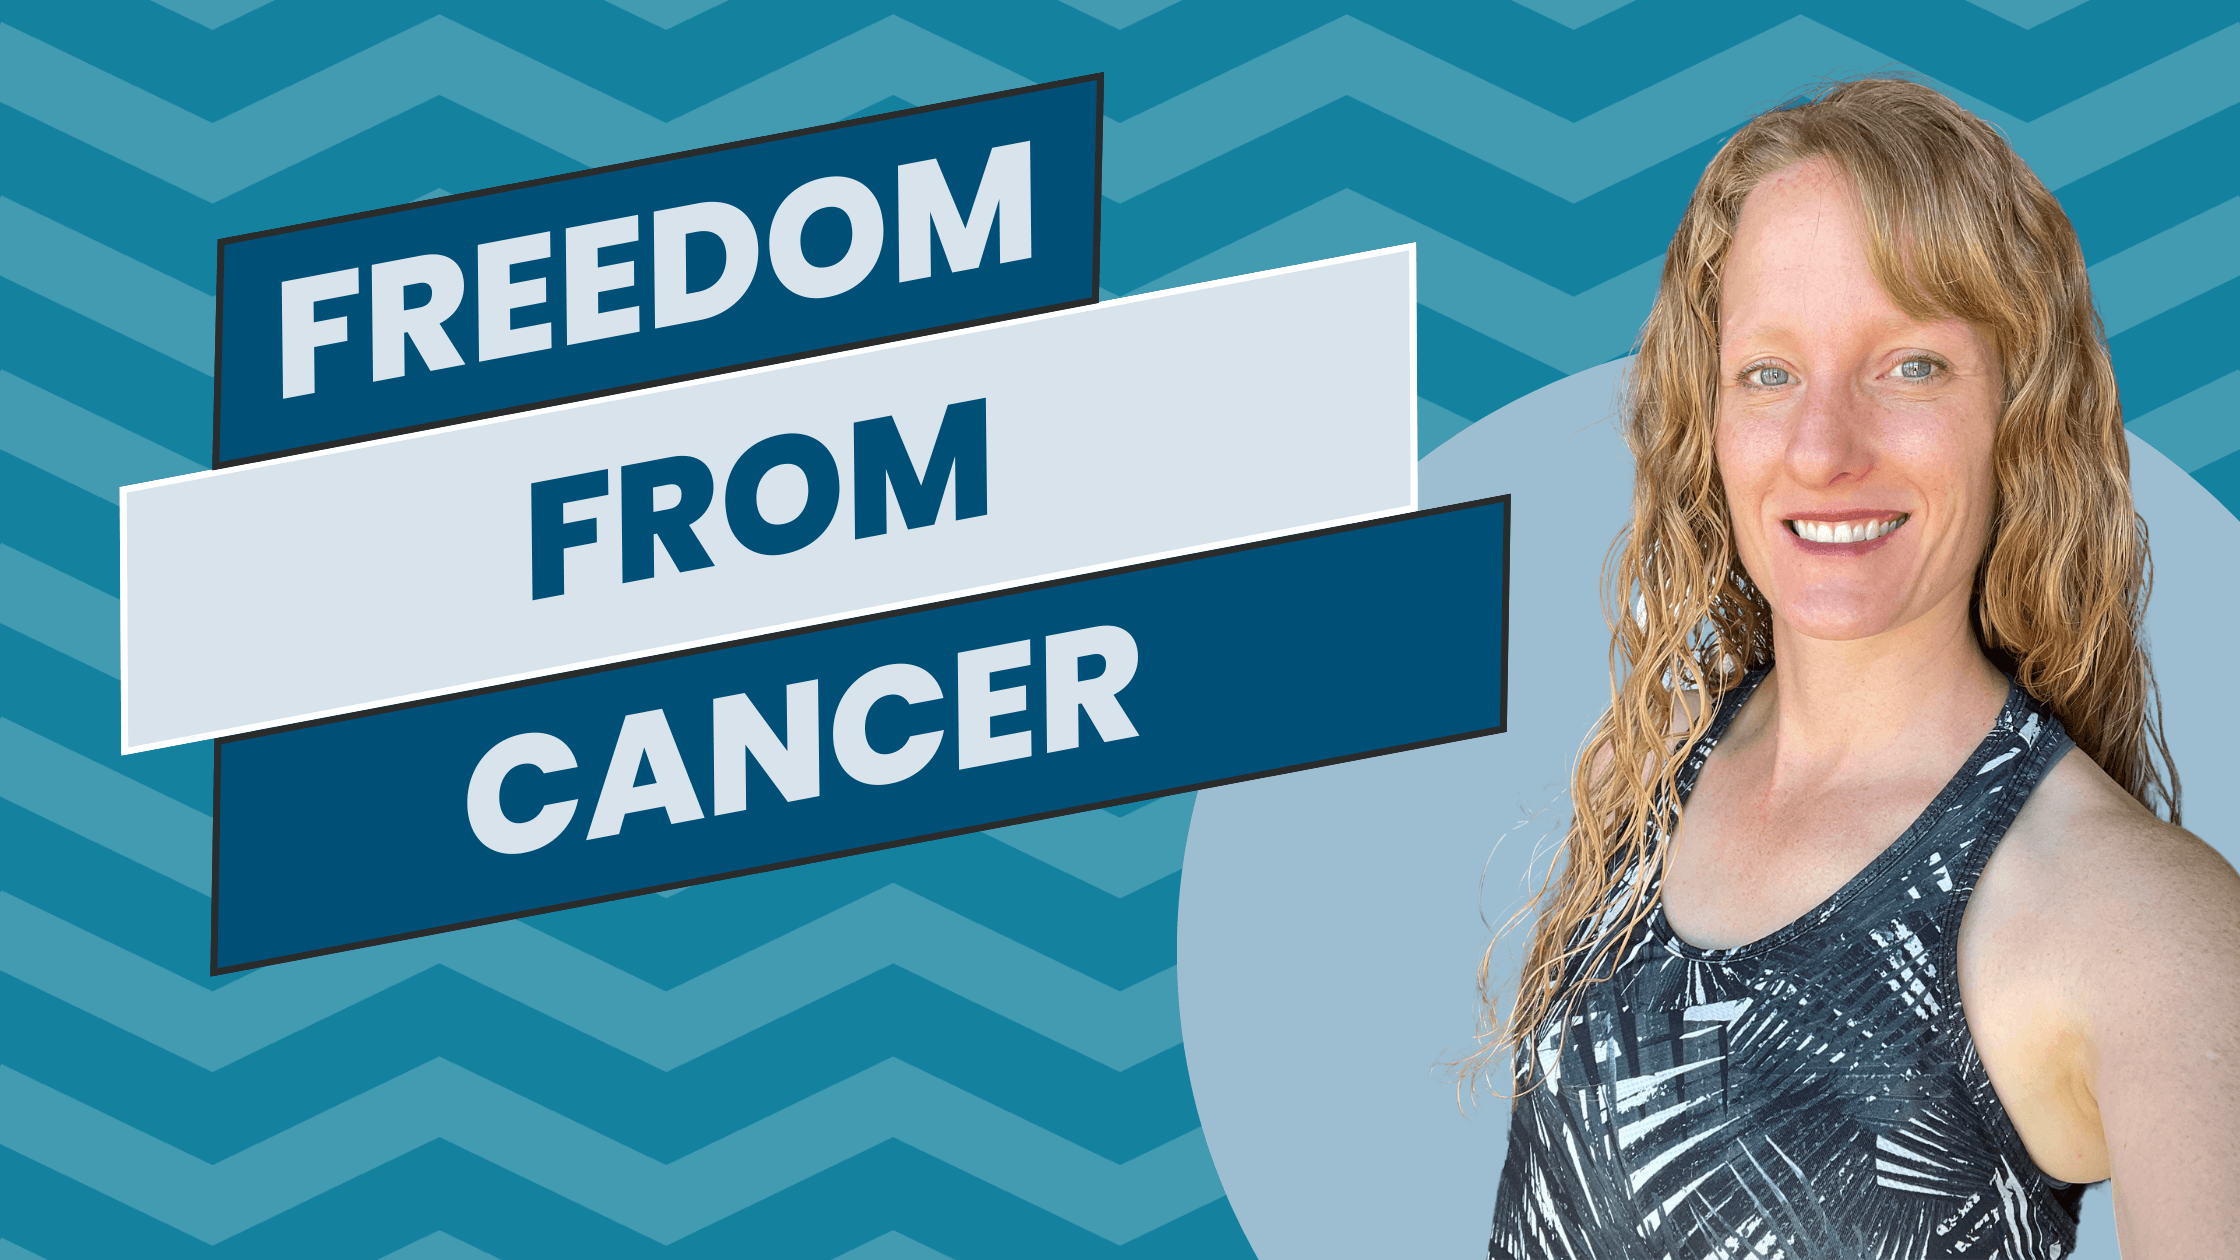 Functional Nutritionist Andrea Nicholson interviews Katrina Foe on her cancer story